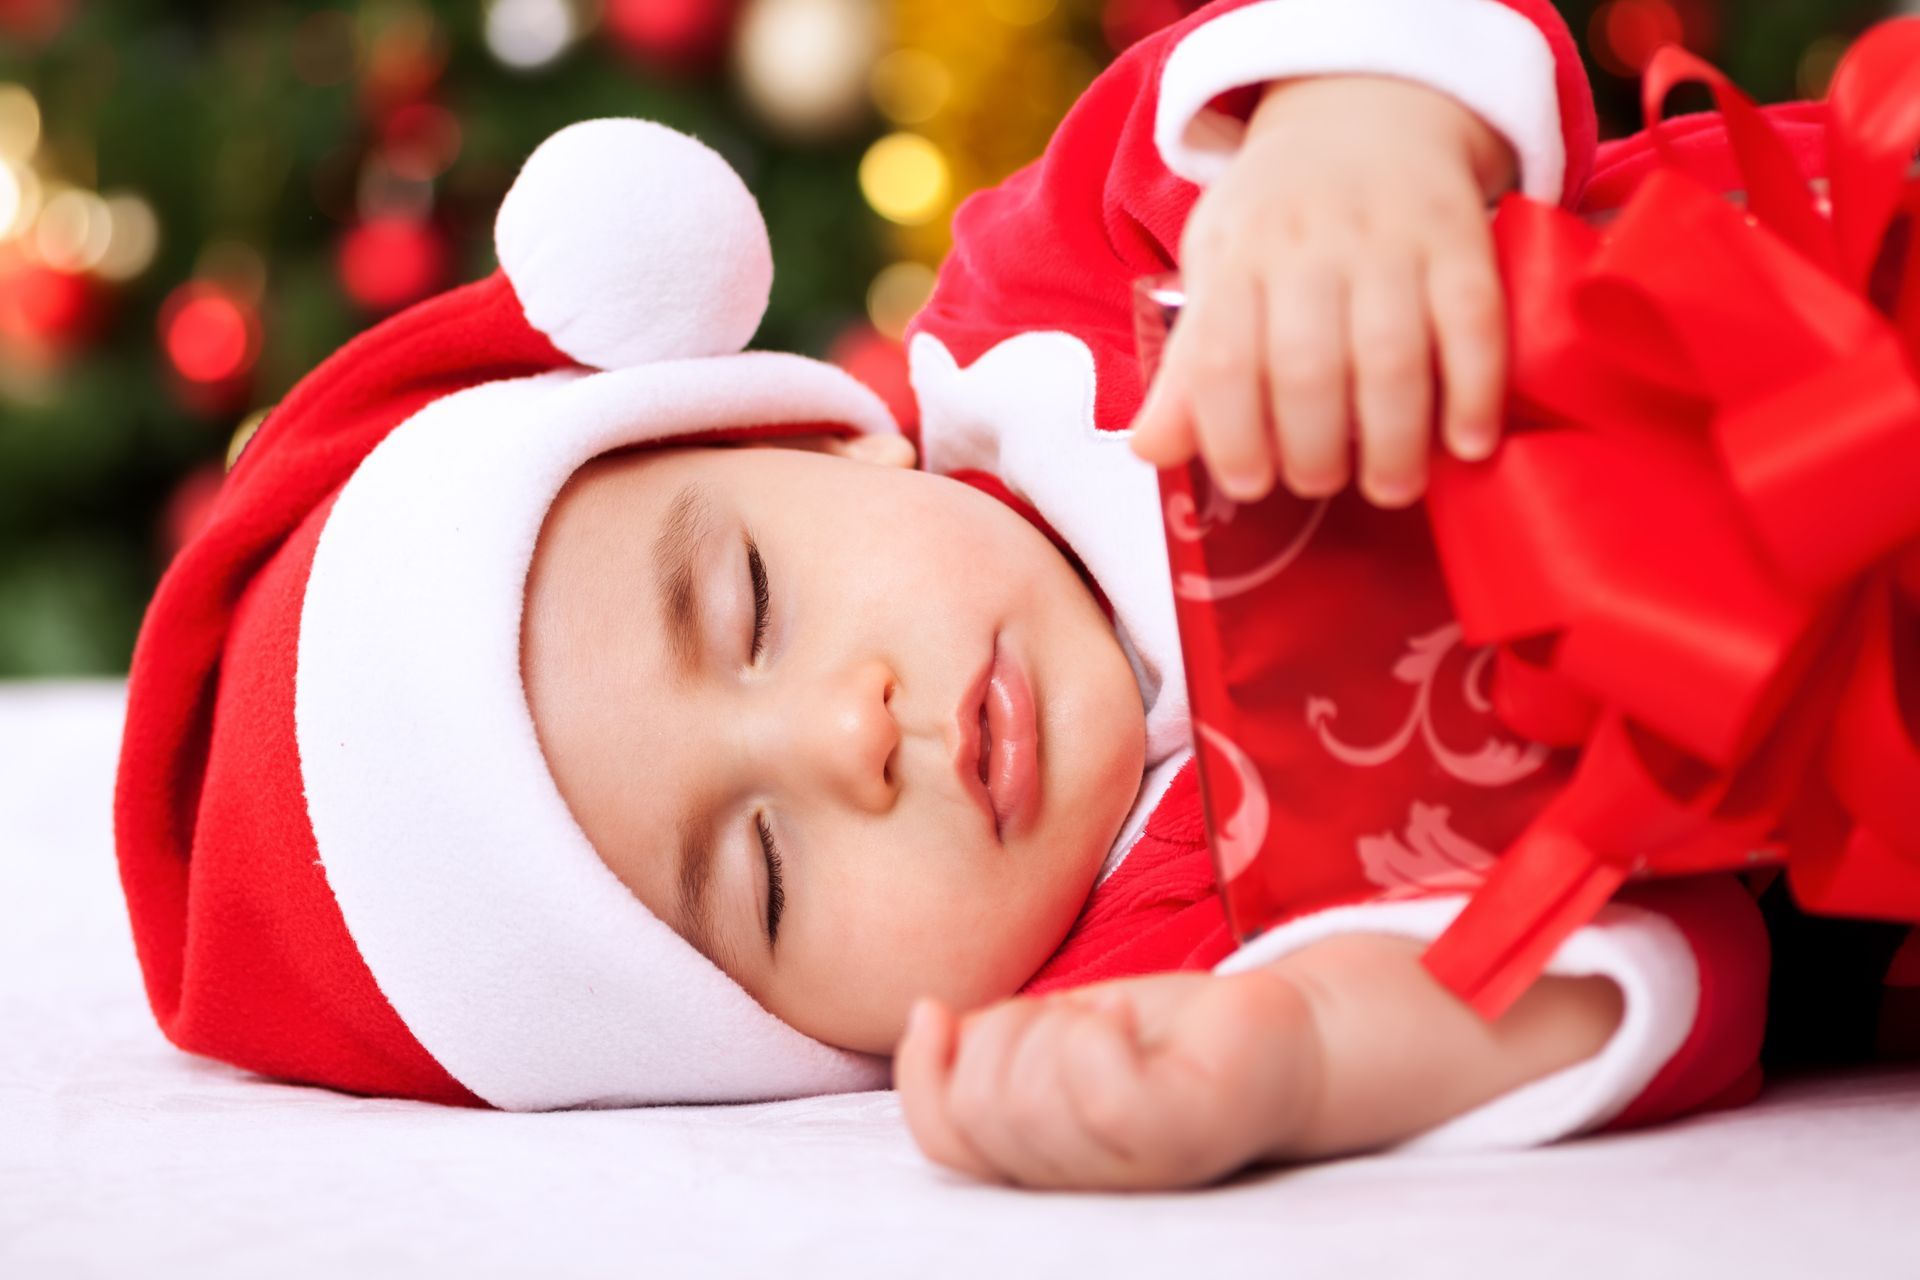 16 Tips for Enjoying the Holidays With an Autistic Child